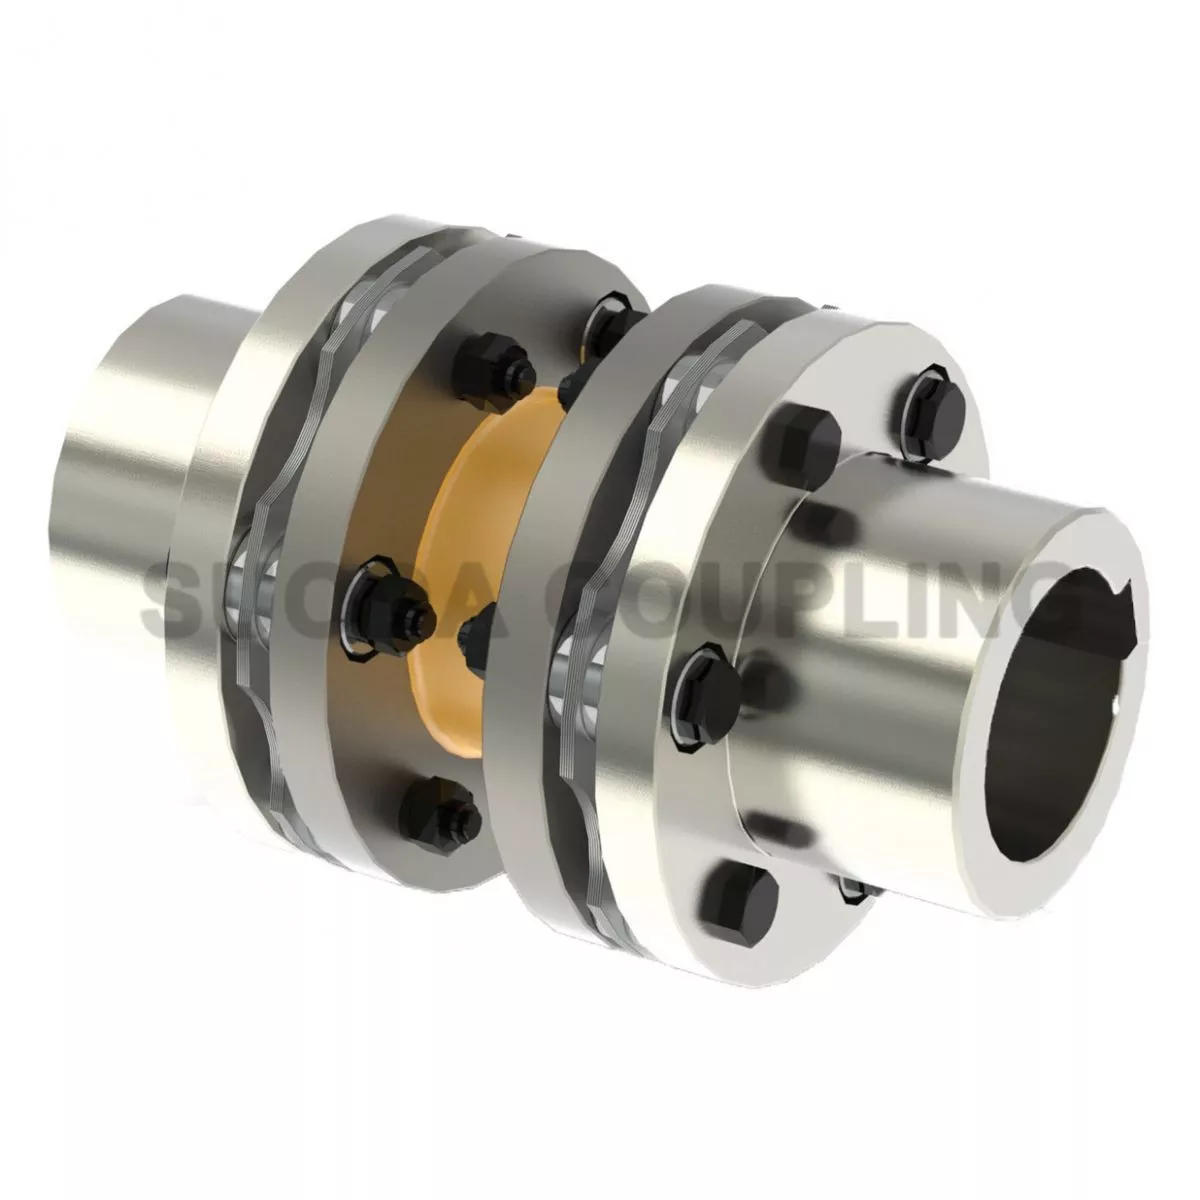 Non-lubricated Disc Coupling - DT Type